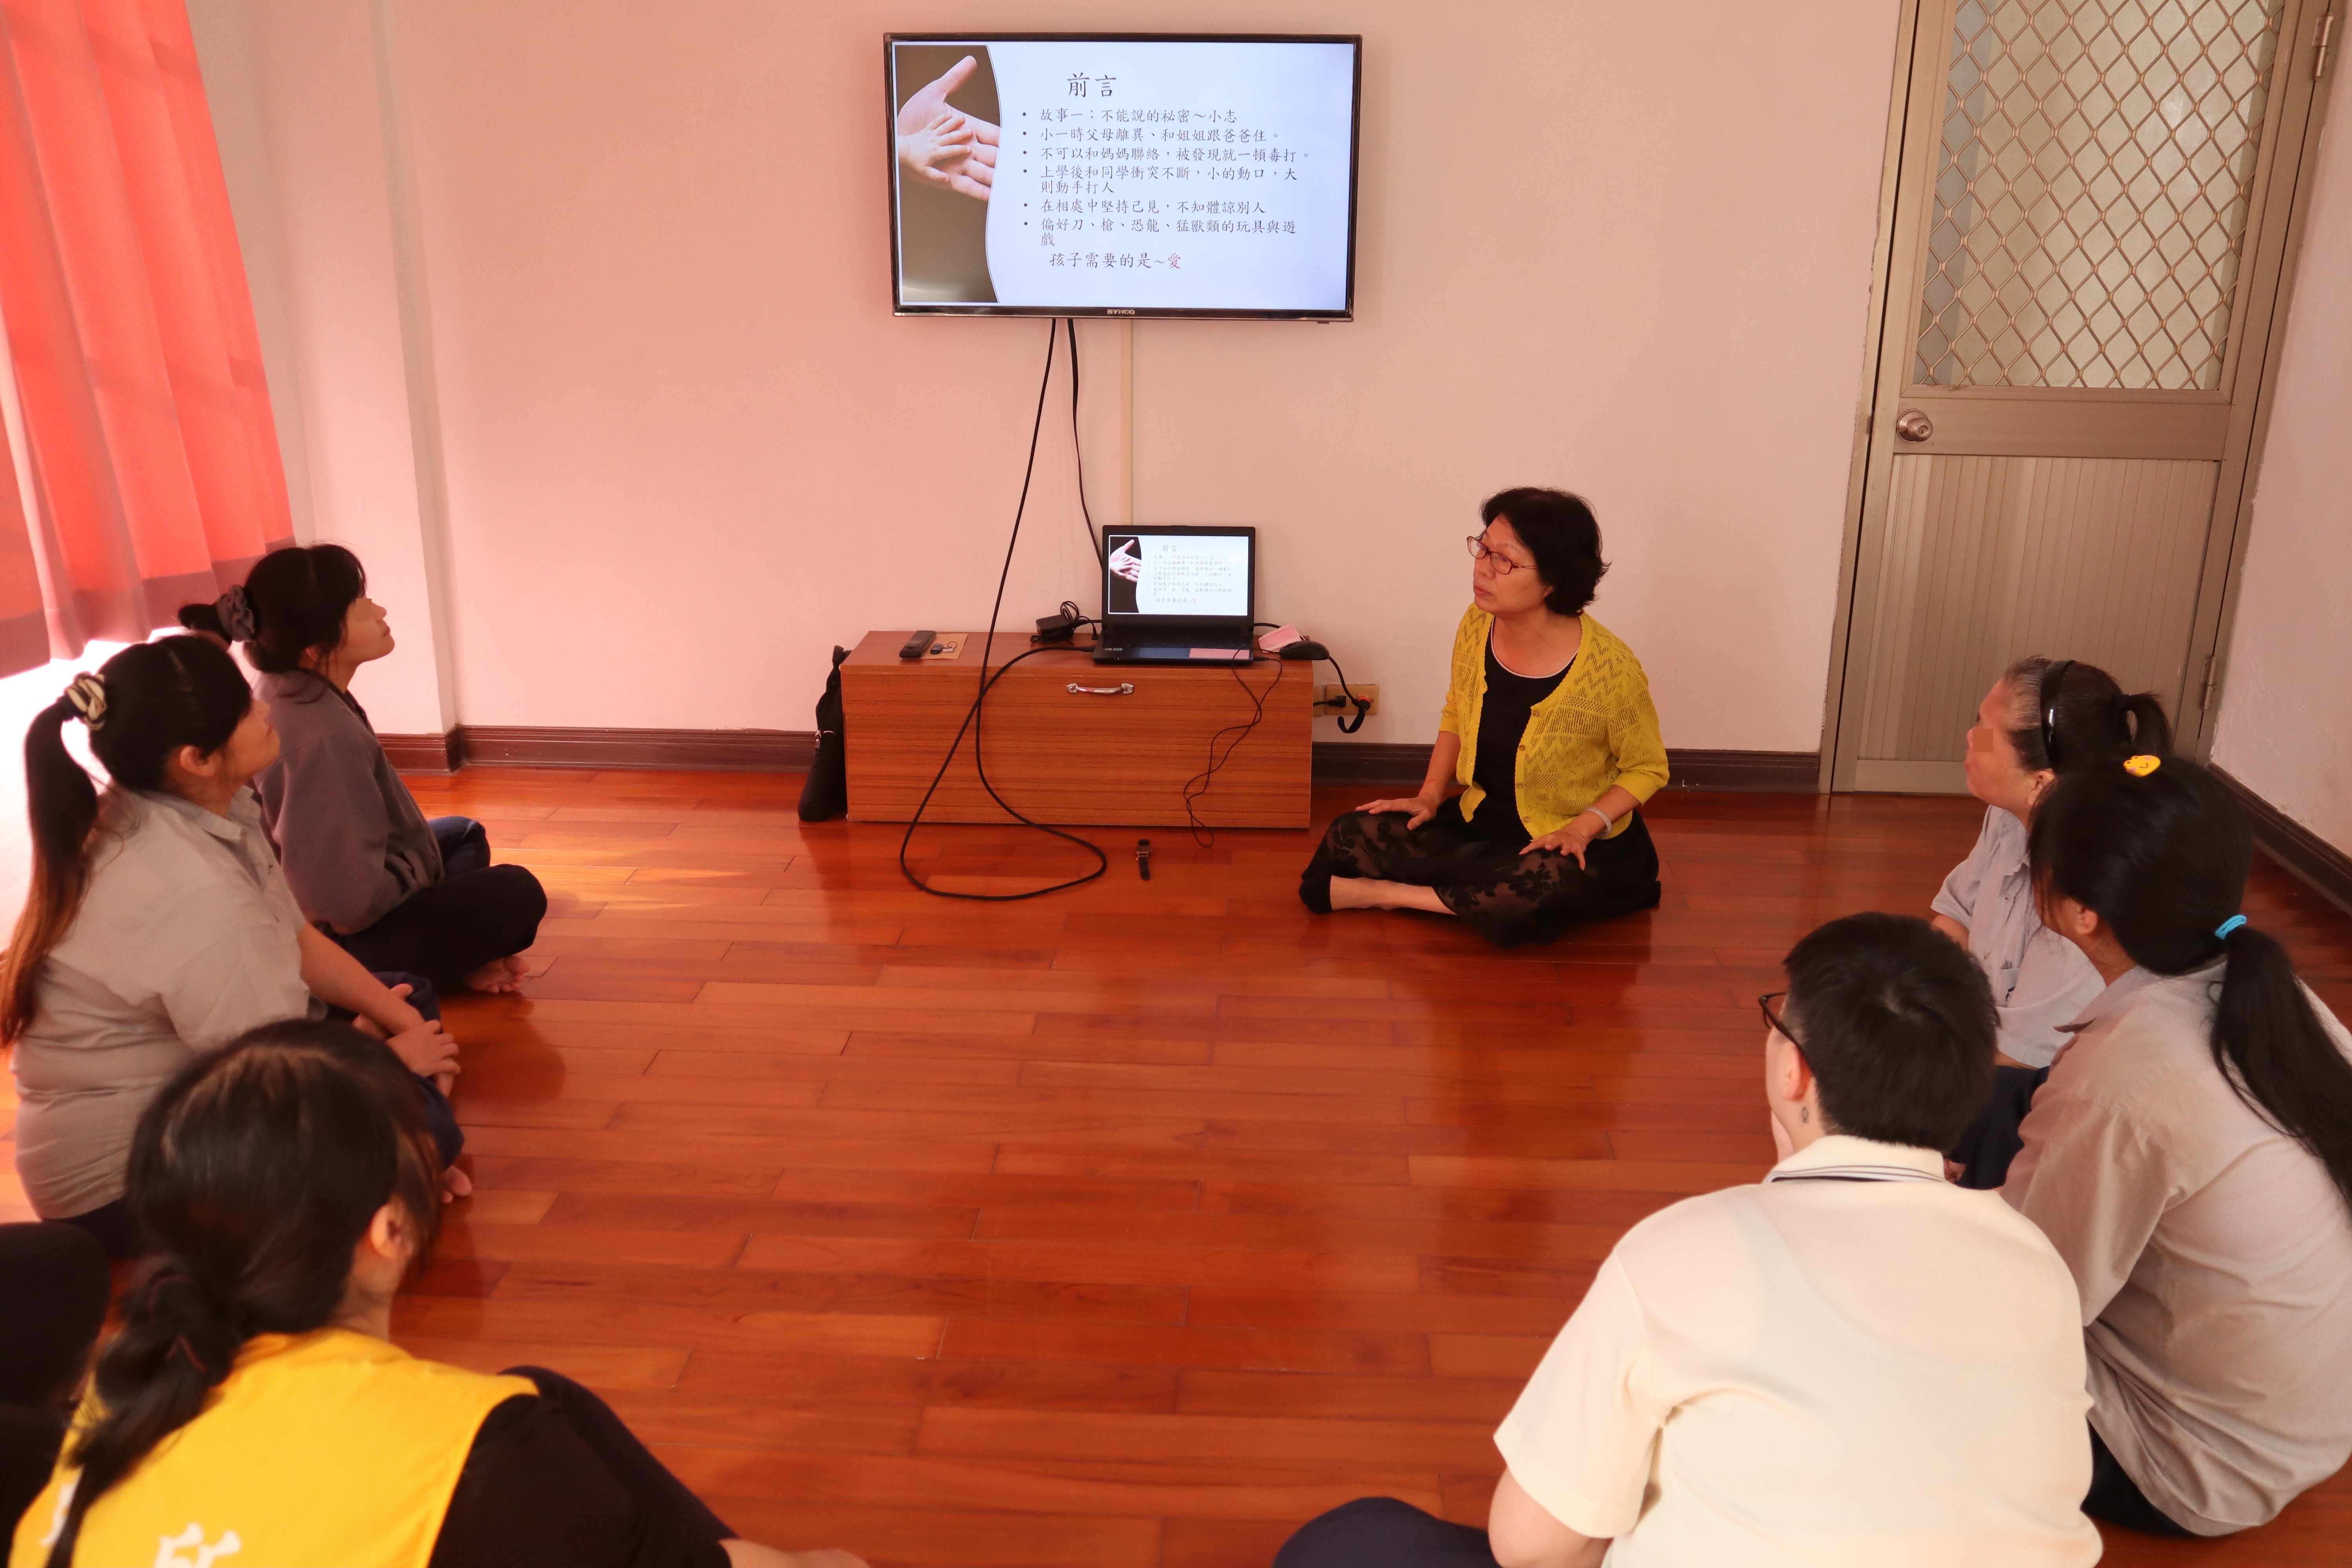 The lecturer used stories to discuss with inmates to help inmates understand the types of teaching styles and parent-child communication skills.